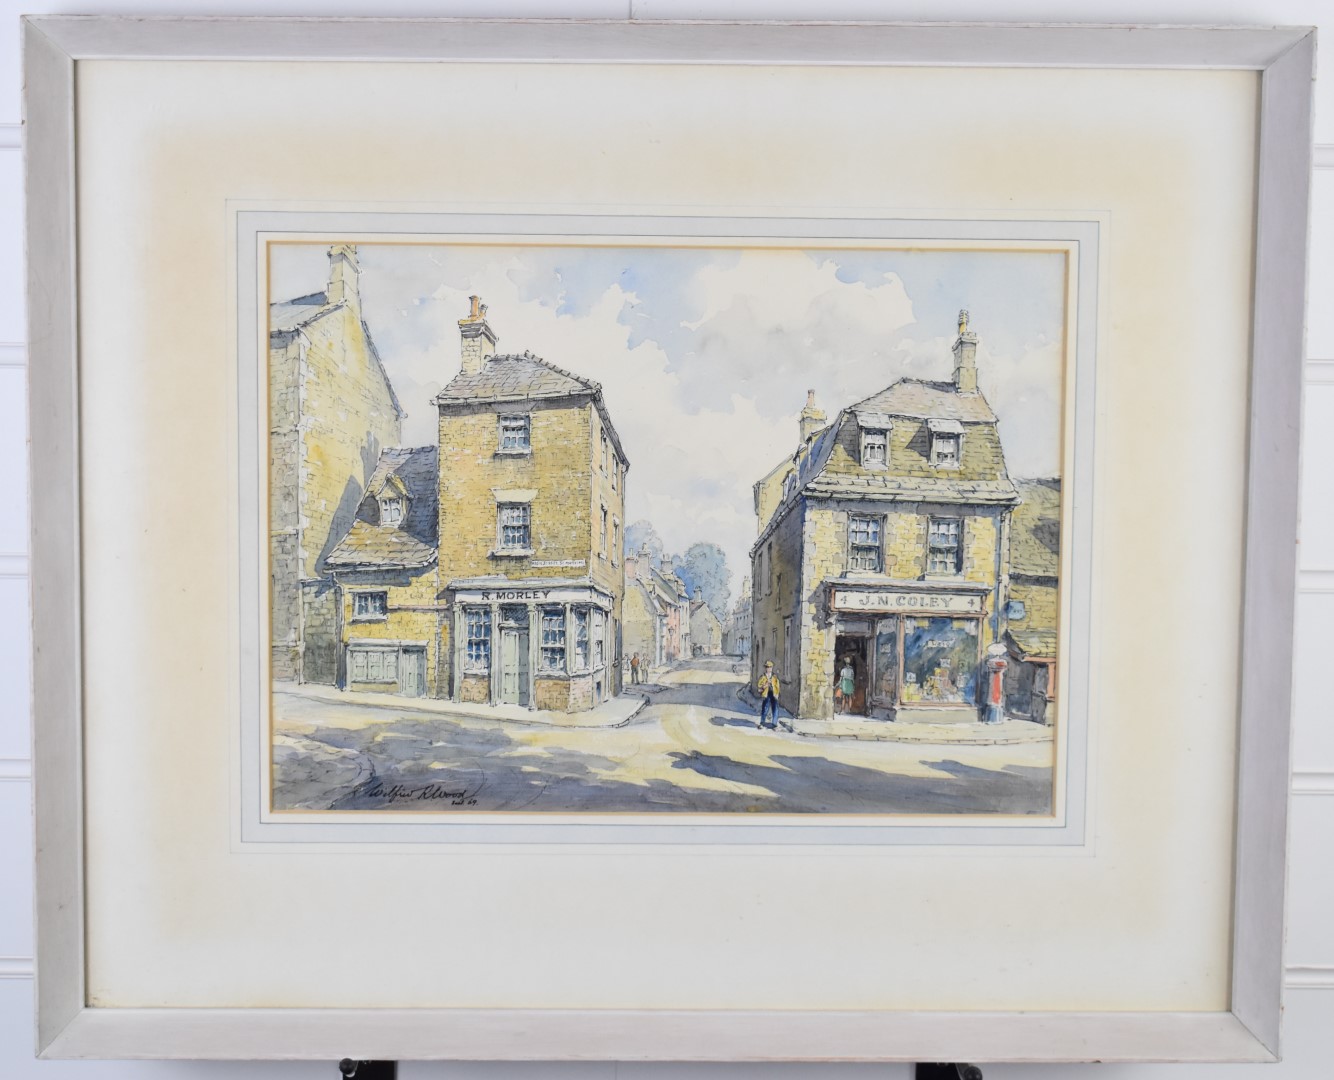 Wilfrid R Wood (1888-1976) watercolour of Welland Road and High Street, St Martins, Stamford, - Image 2 of 5